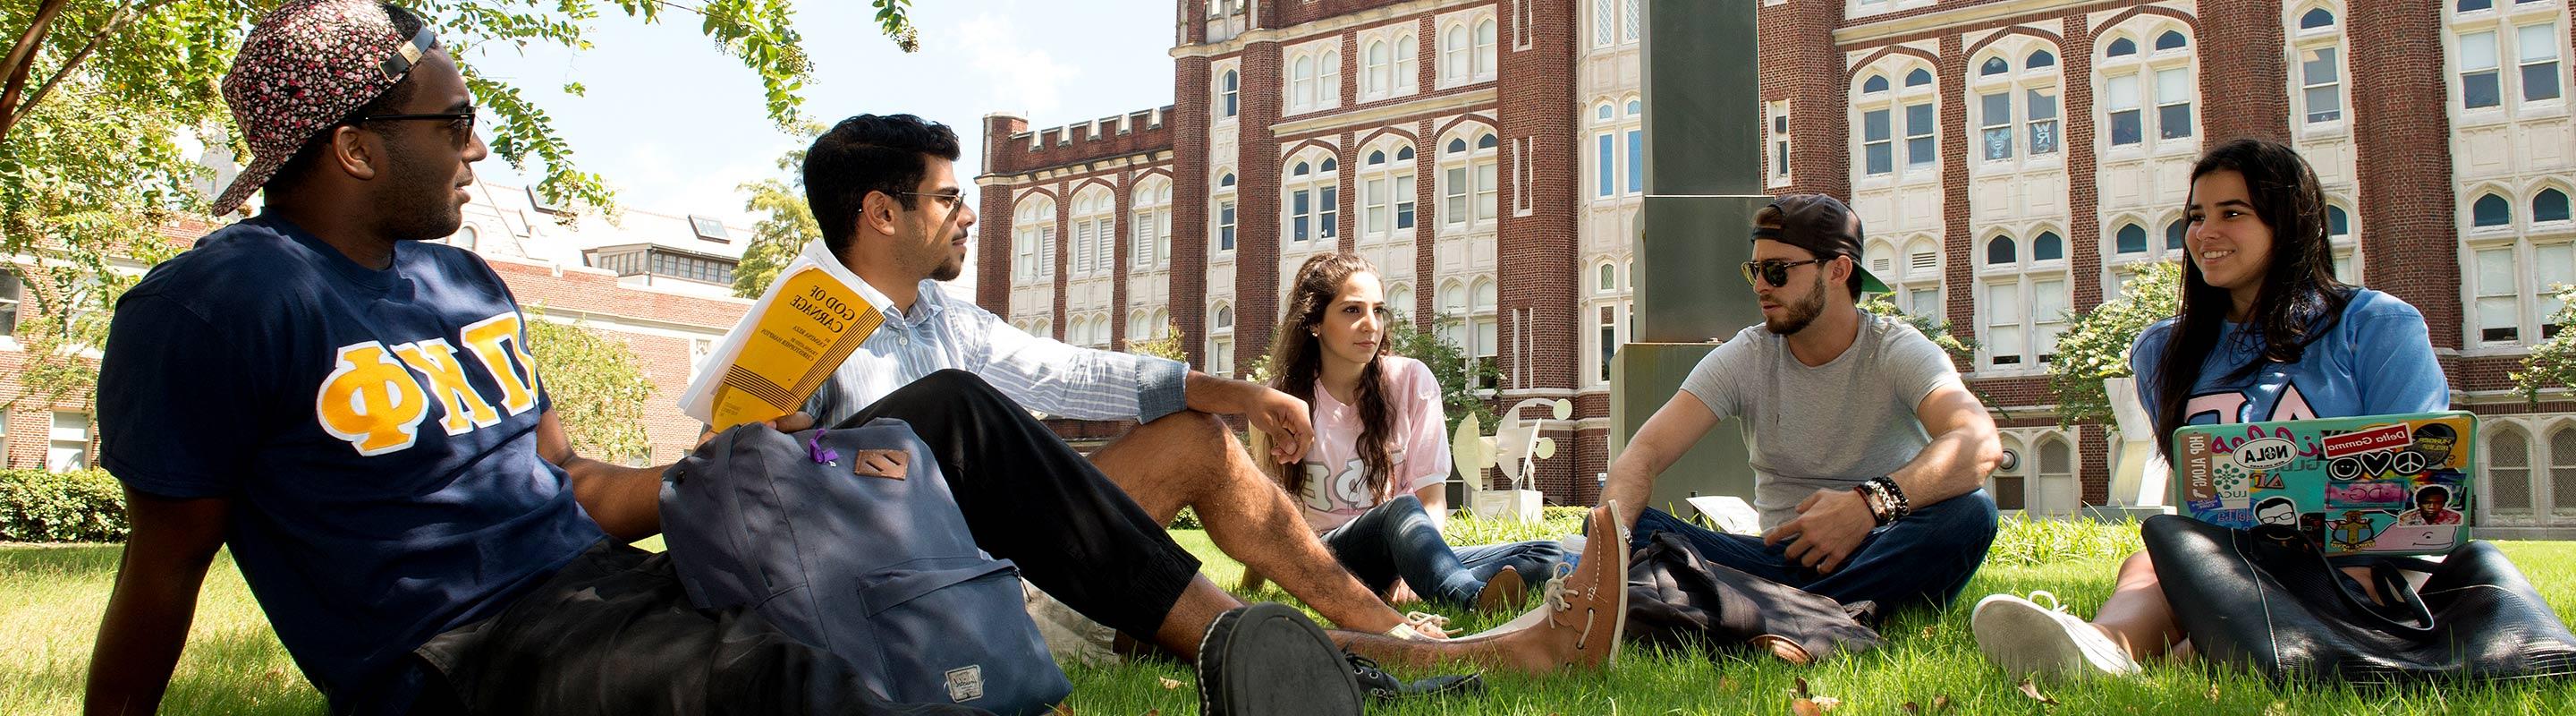 First-year students on lawn discussing